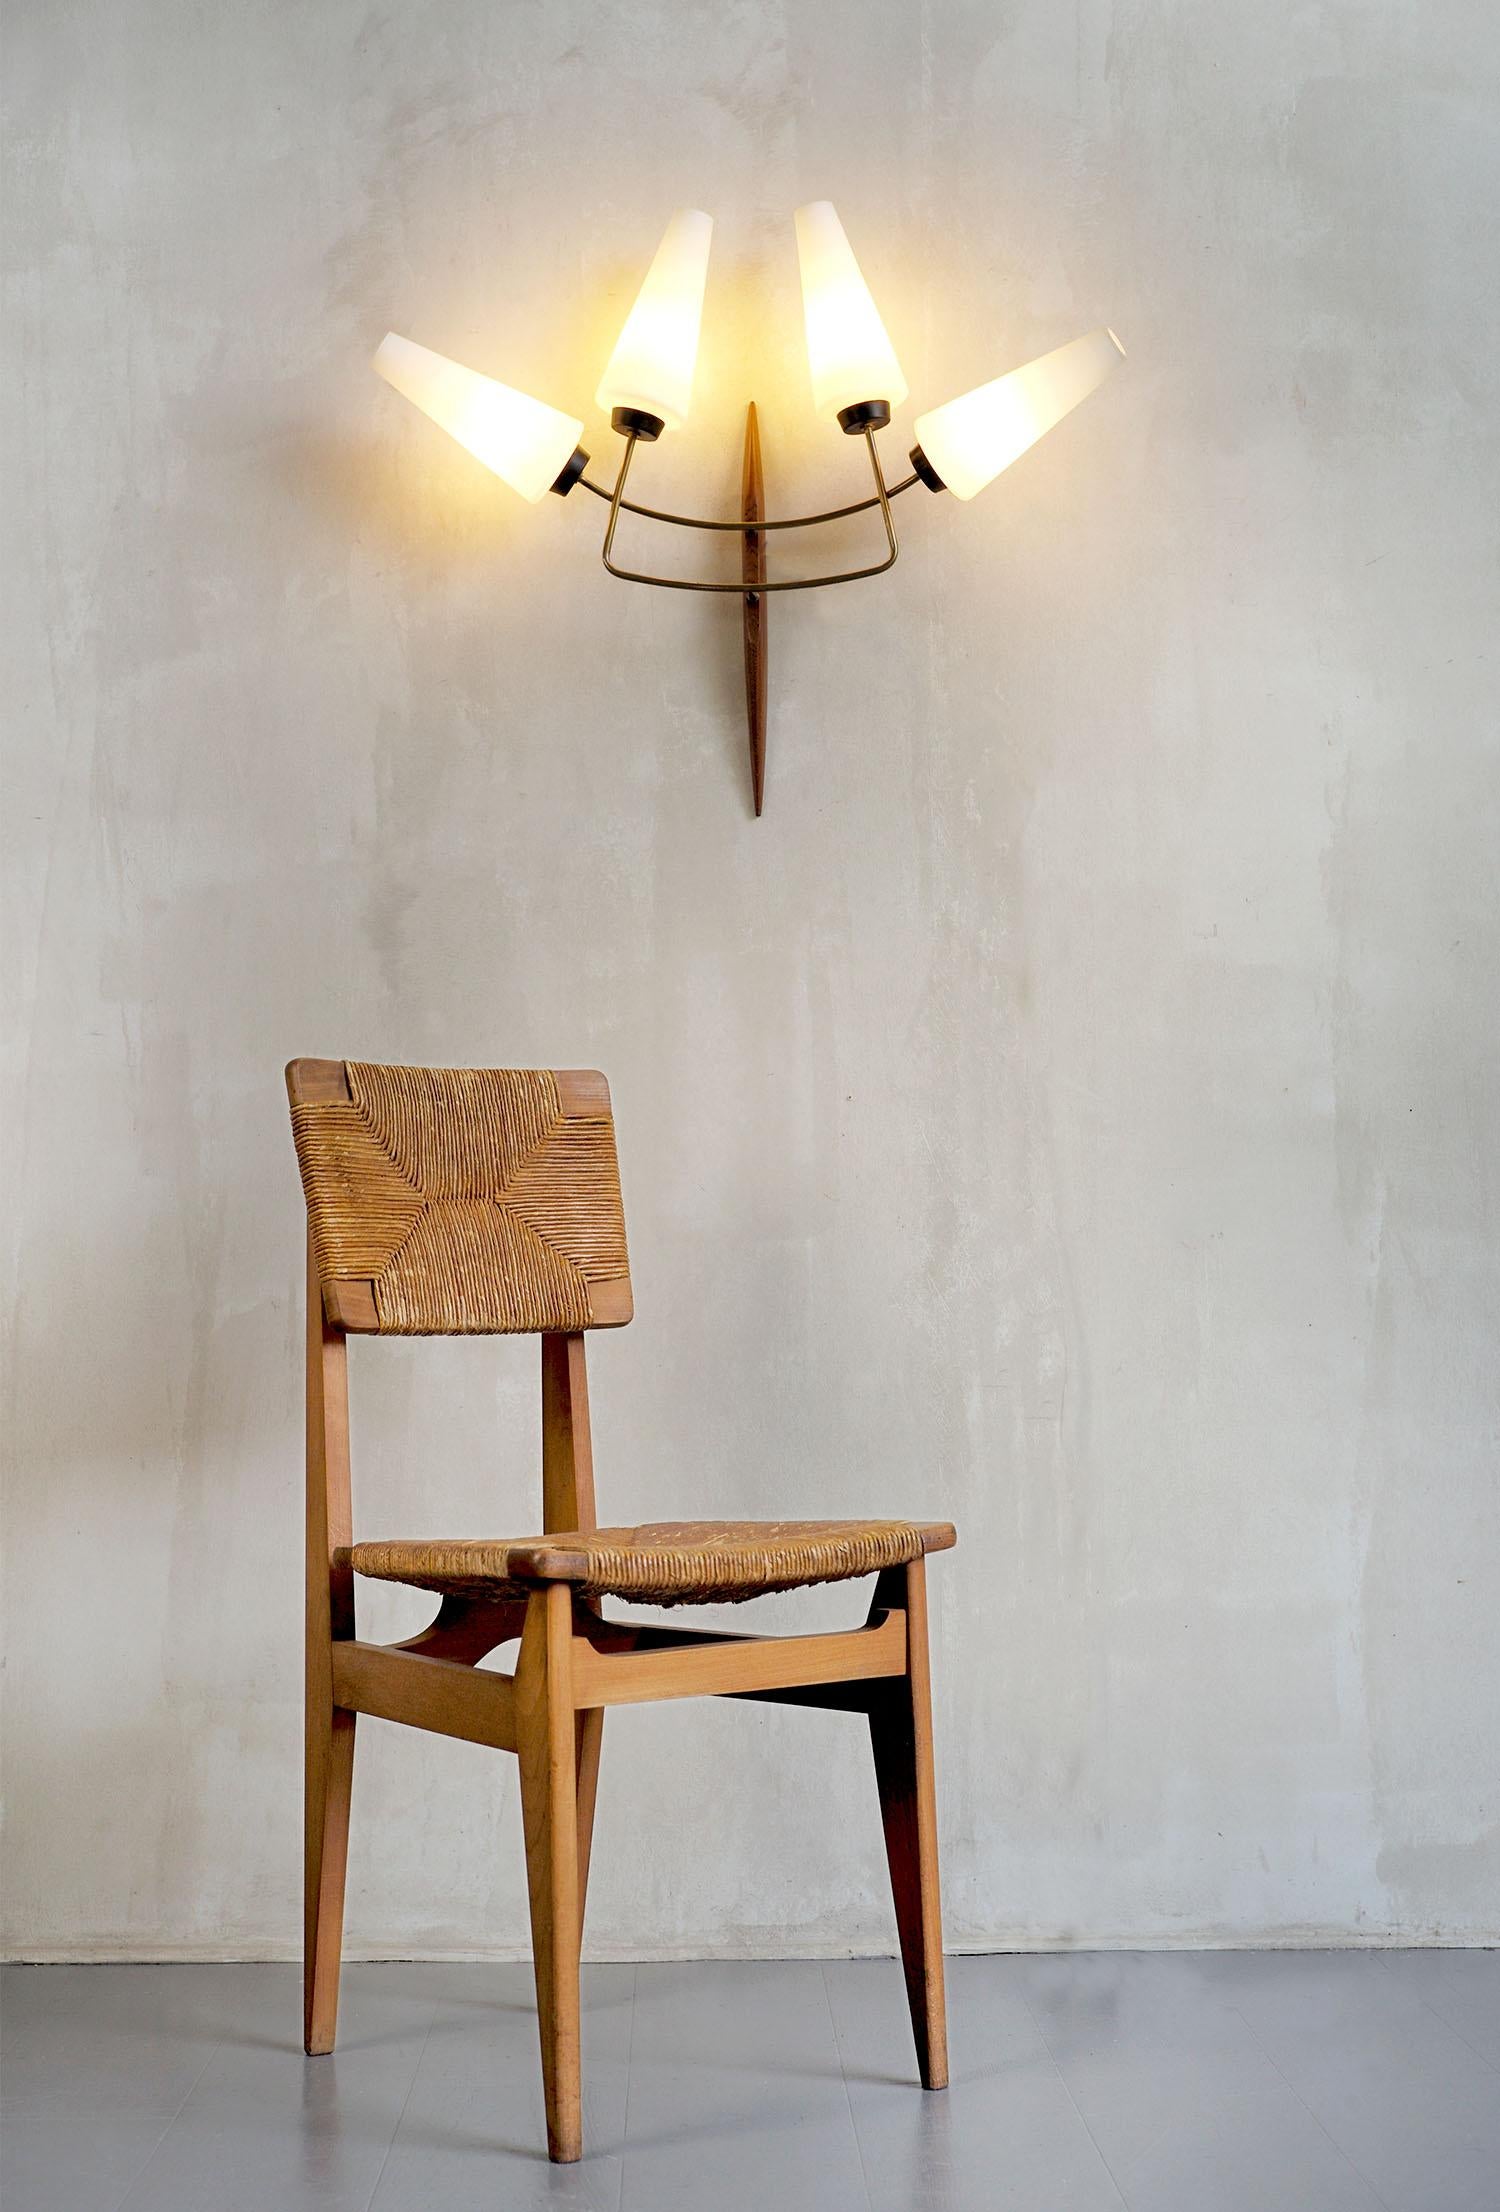 Maison Lunel, Large Wall Lamp with 4 Lights, France 1960 For Sale 2